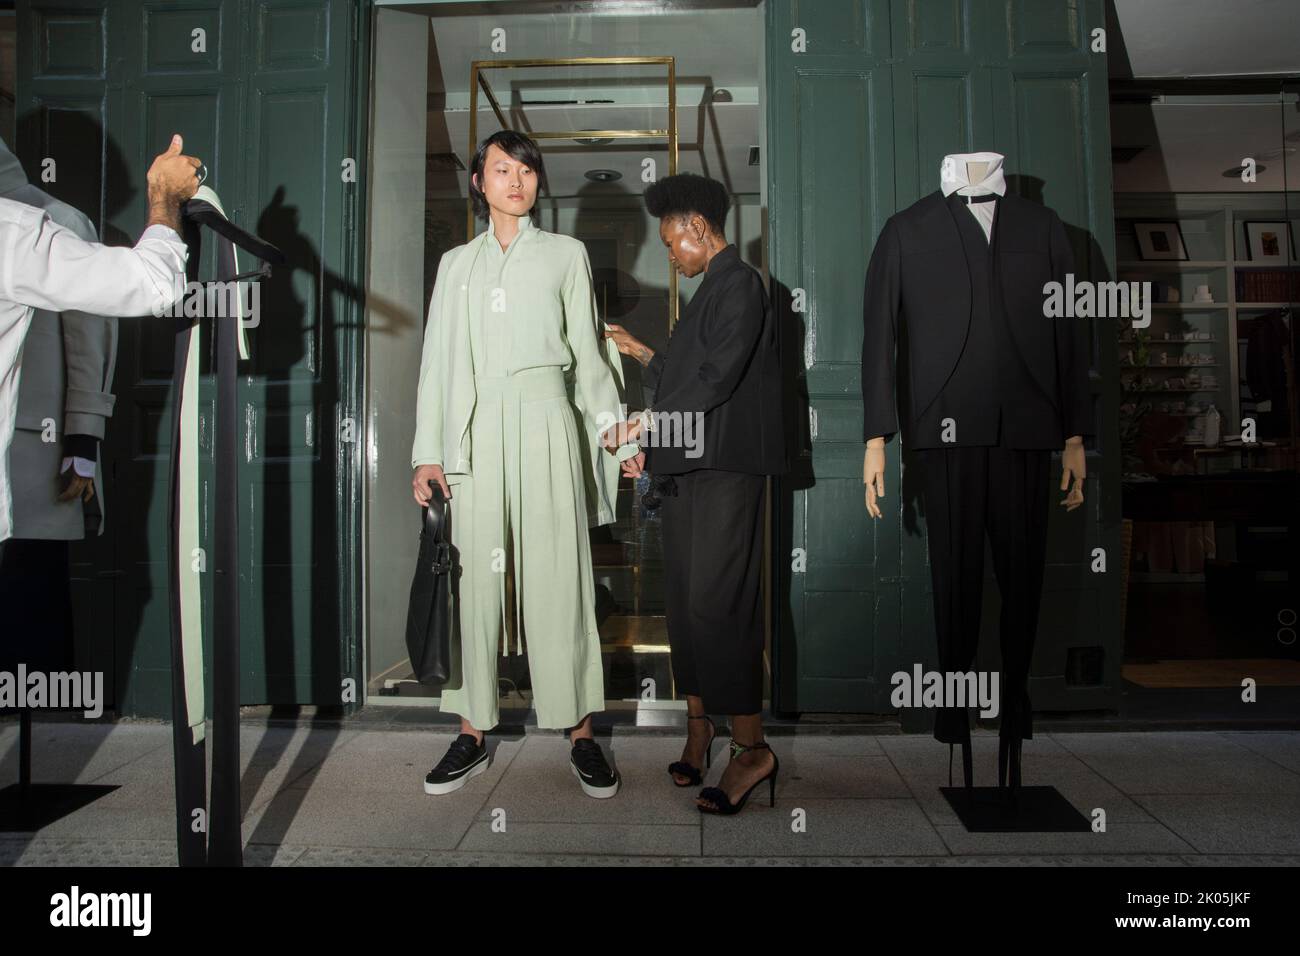 Oteyza has presented at Paris Fashion Week®. The models have left the Oteyza store to parade in Piamonte street, an urban event to show their new proposals that link Spanish High Craftsmanship with luxury streetwear. Stock Photo